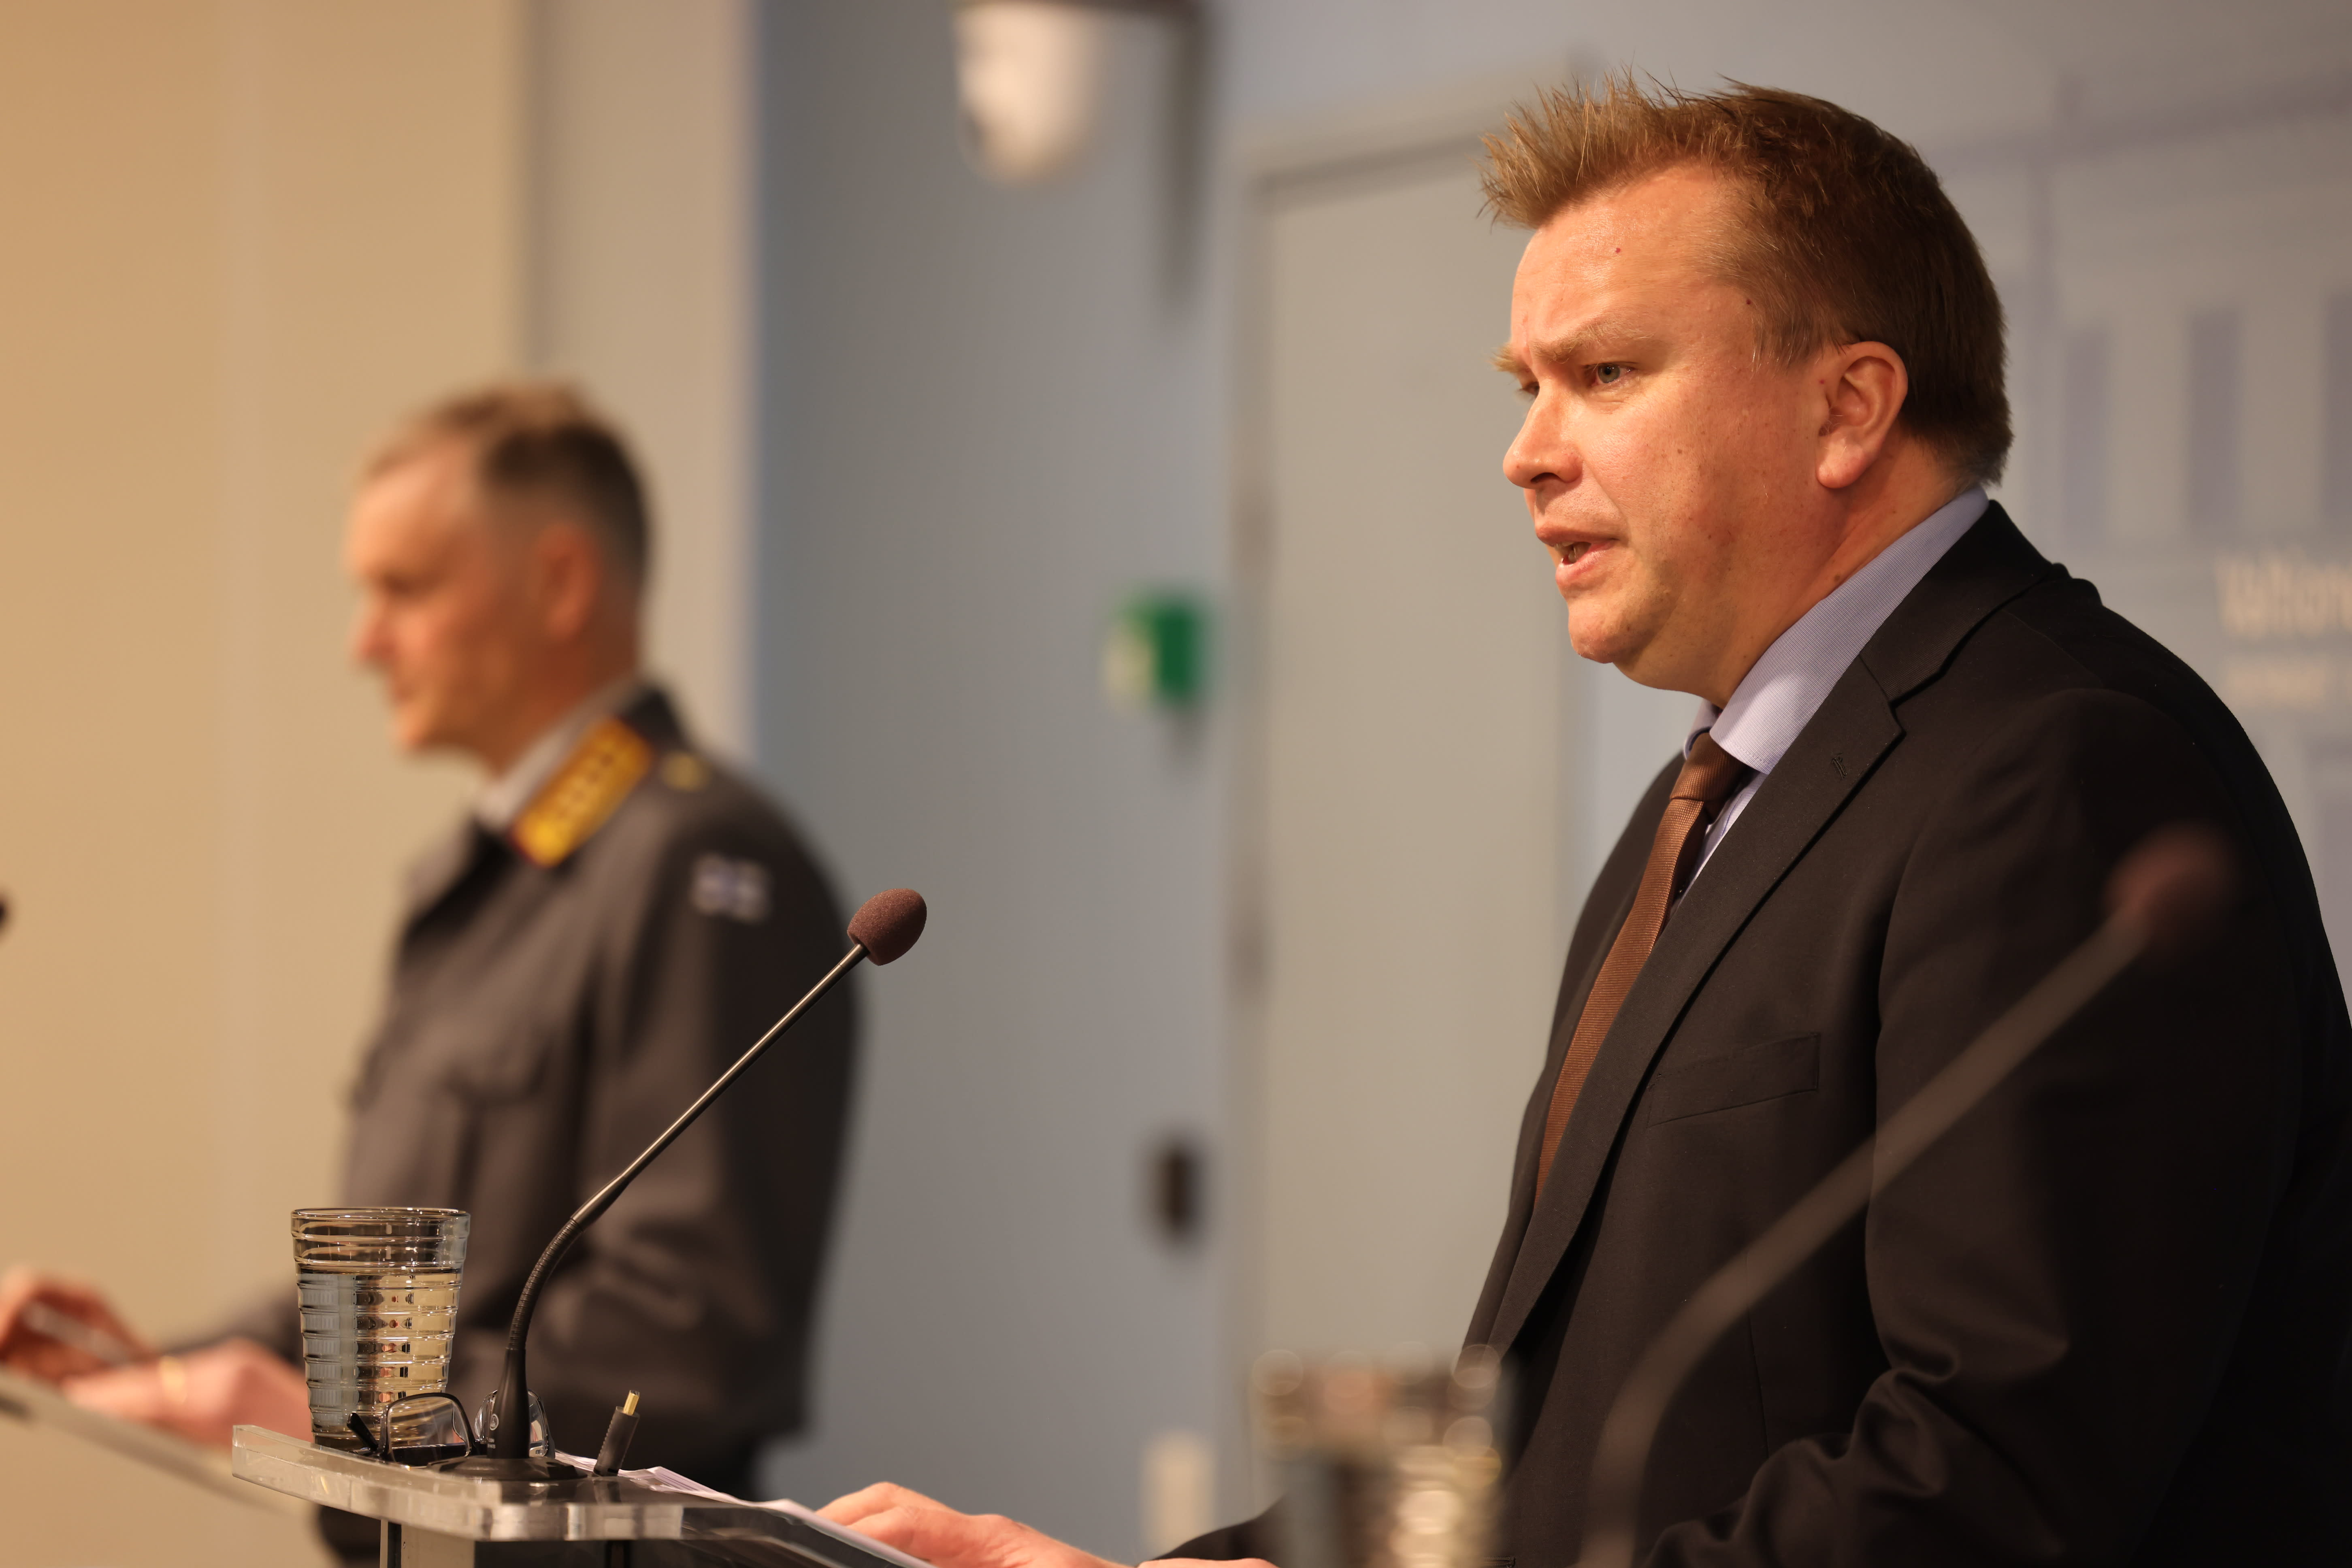 Finland is directing resources to defense after Russia's invasion of Ukraine